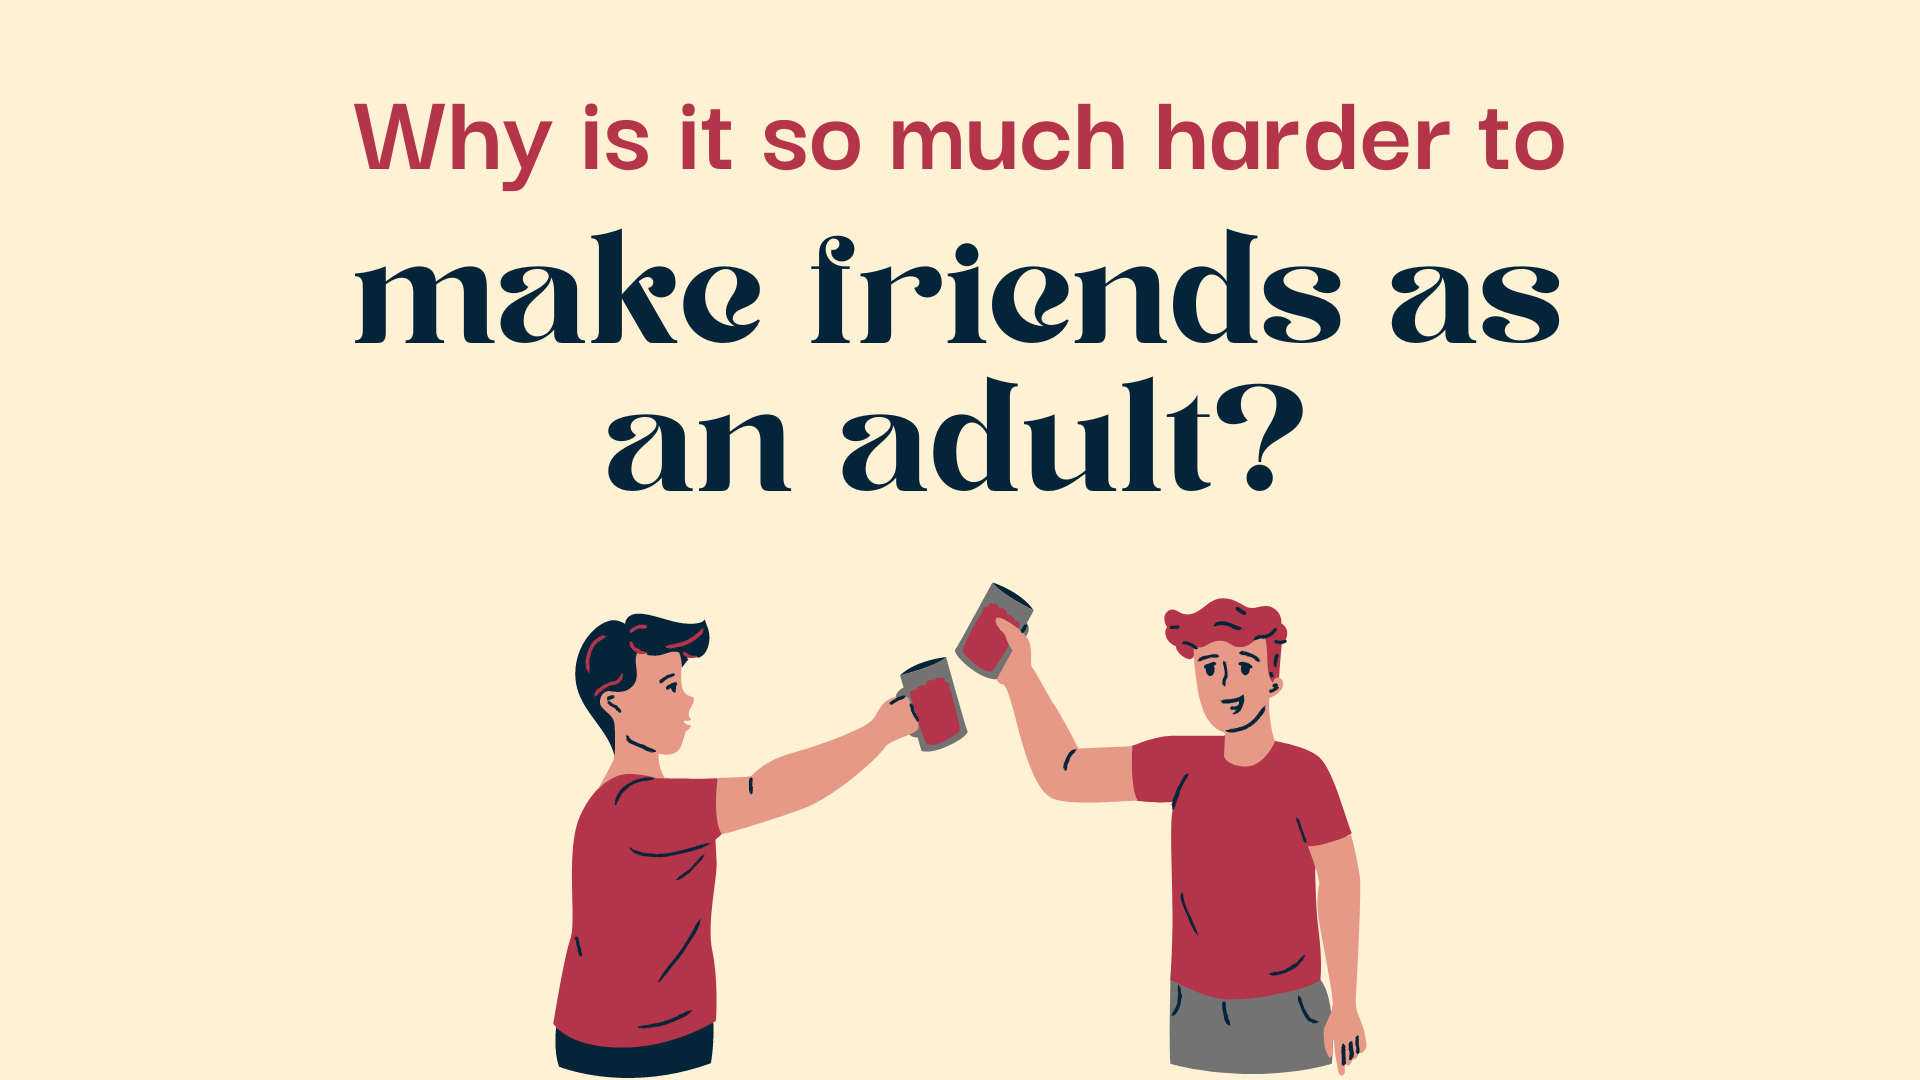 How Do You Make Friends with Someone?